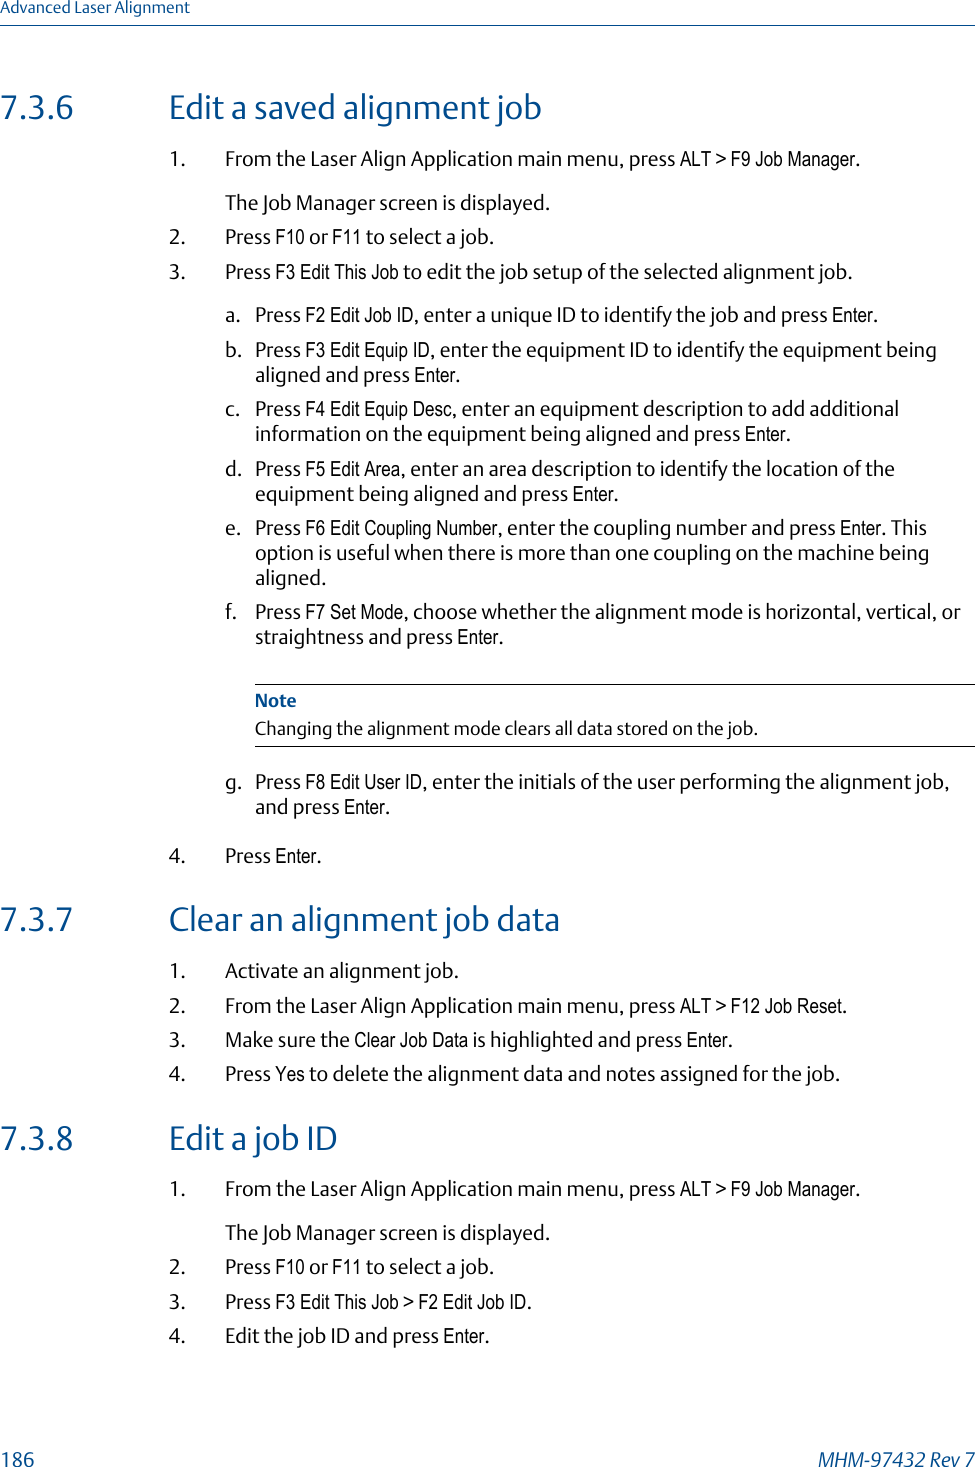 7.3.6 Edit a saved alignment job1. From the Laser Align Application main menu, press ALT &gt; F9 Job Manager.The Job Manager screen is displayed.2. Press F10 or F11 to select a job.3. Press F3 Edit This Job to edit the job setup of the selected alignment job.a. Press F2 Edit Job ID, enter a unique ID to identify the job and press Enter.b. Press F3 Edit Equip ID, enter the equipment ID to identify the equipment beingaligned and press Enter.c. Press F4 Edit Equip Desc, enter an equipment description to add additionalinformation on the equipment being aligned and press Enter.d. Press F5 Edit Area, enter an area description to identify the location of theequipment being aligned and press Enter.e. Press F6 Edit Coupling Number, enter the coupling number and press Enter. Thisoption is useful when there is more than one coupling on the machine beingaligned.f. Press F7 Set Mode, choose whether the alignment mode is horizontal, vertical, orstraightness and press Enter.NoteChanging the alignment mode clears all data stored on the job.g. Press F8 Edit User ID, enter the initials of the user performing the alignment job,and press Enter.4. Press Enter.7.3.7 Clear an alignment job data1. Activate an alignment job.2. From the Laser Align Application main menu, press ALT &gt; F12 Job Reset.3. Make sure the Clear Job Data is highlighted and press Enter.4. Press Yes to delete the alignment data and notes assigned for the job.7.3.8 Edit a job ID1. From the Laser Align Application main menu, press ALT &gt; F9 Job Manager.The Job Manager screen is displayed.2. Press F10 or F11 to select a job.3. Press F3 Edit This Job &gt; F2 Edit Job ID.4. Edit the job ID and press Enter.Advanced Laser Alignment186 MHM-97432 Rev 7